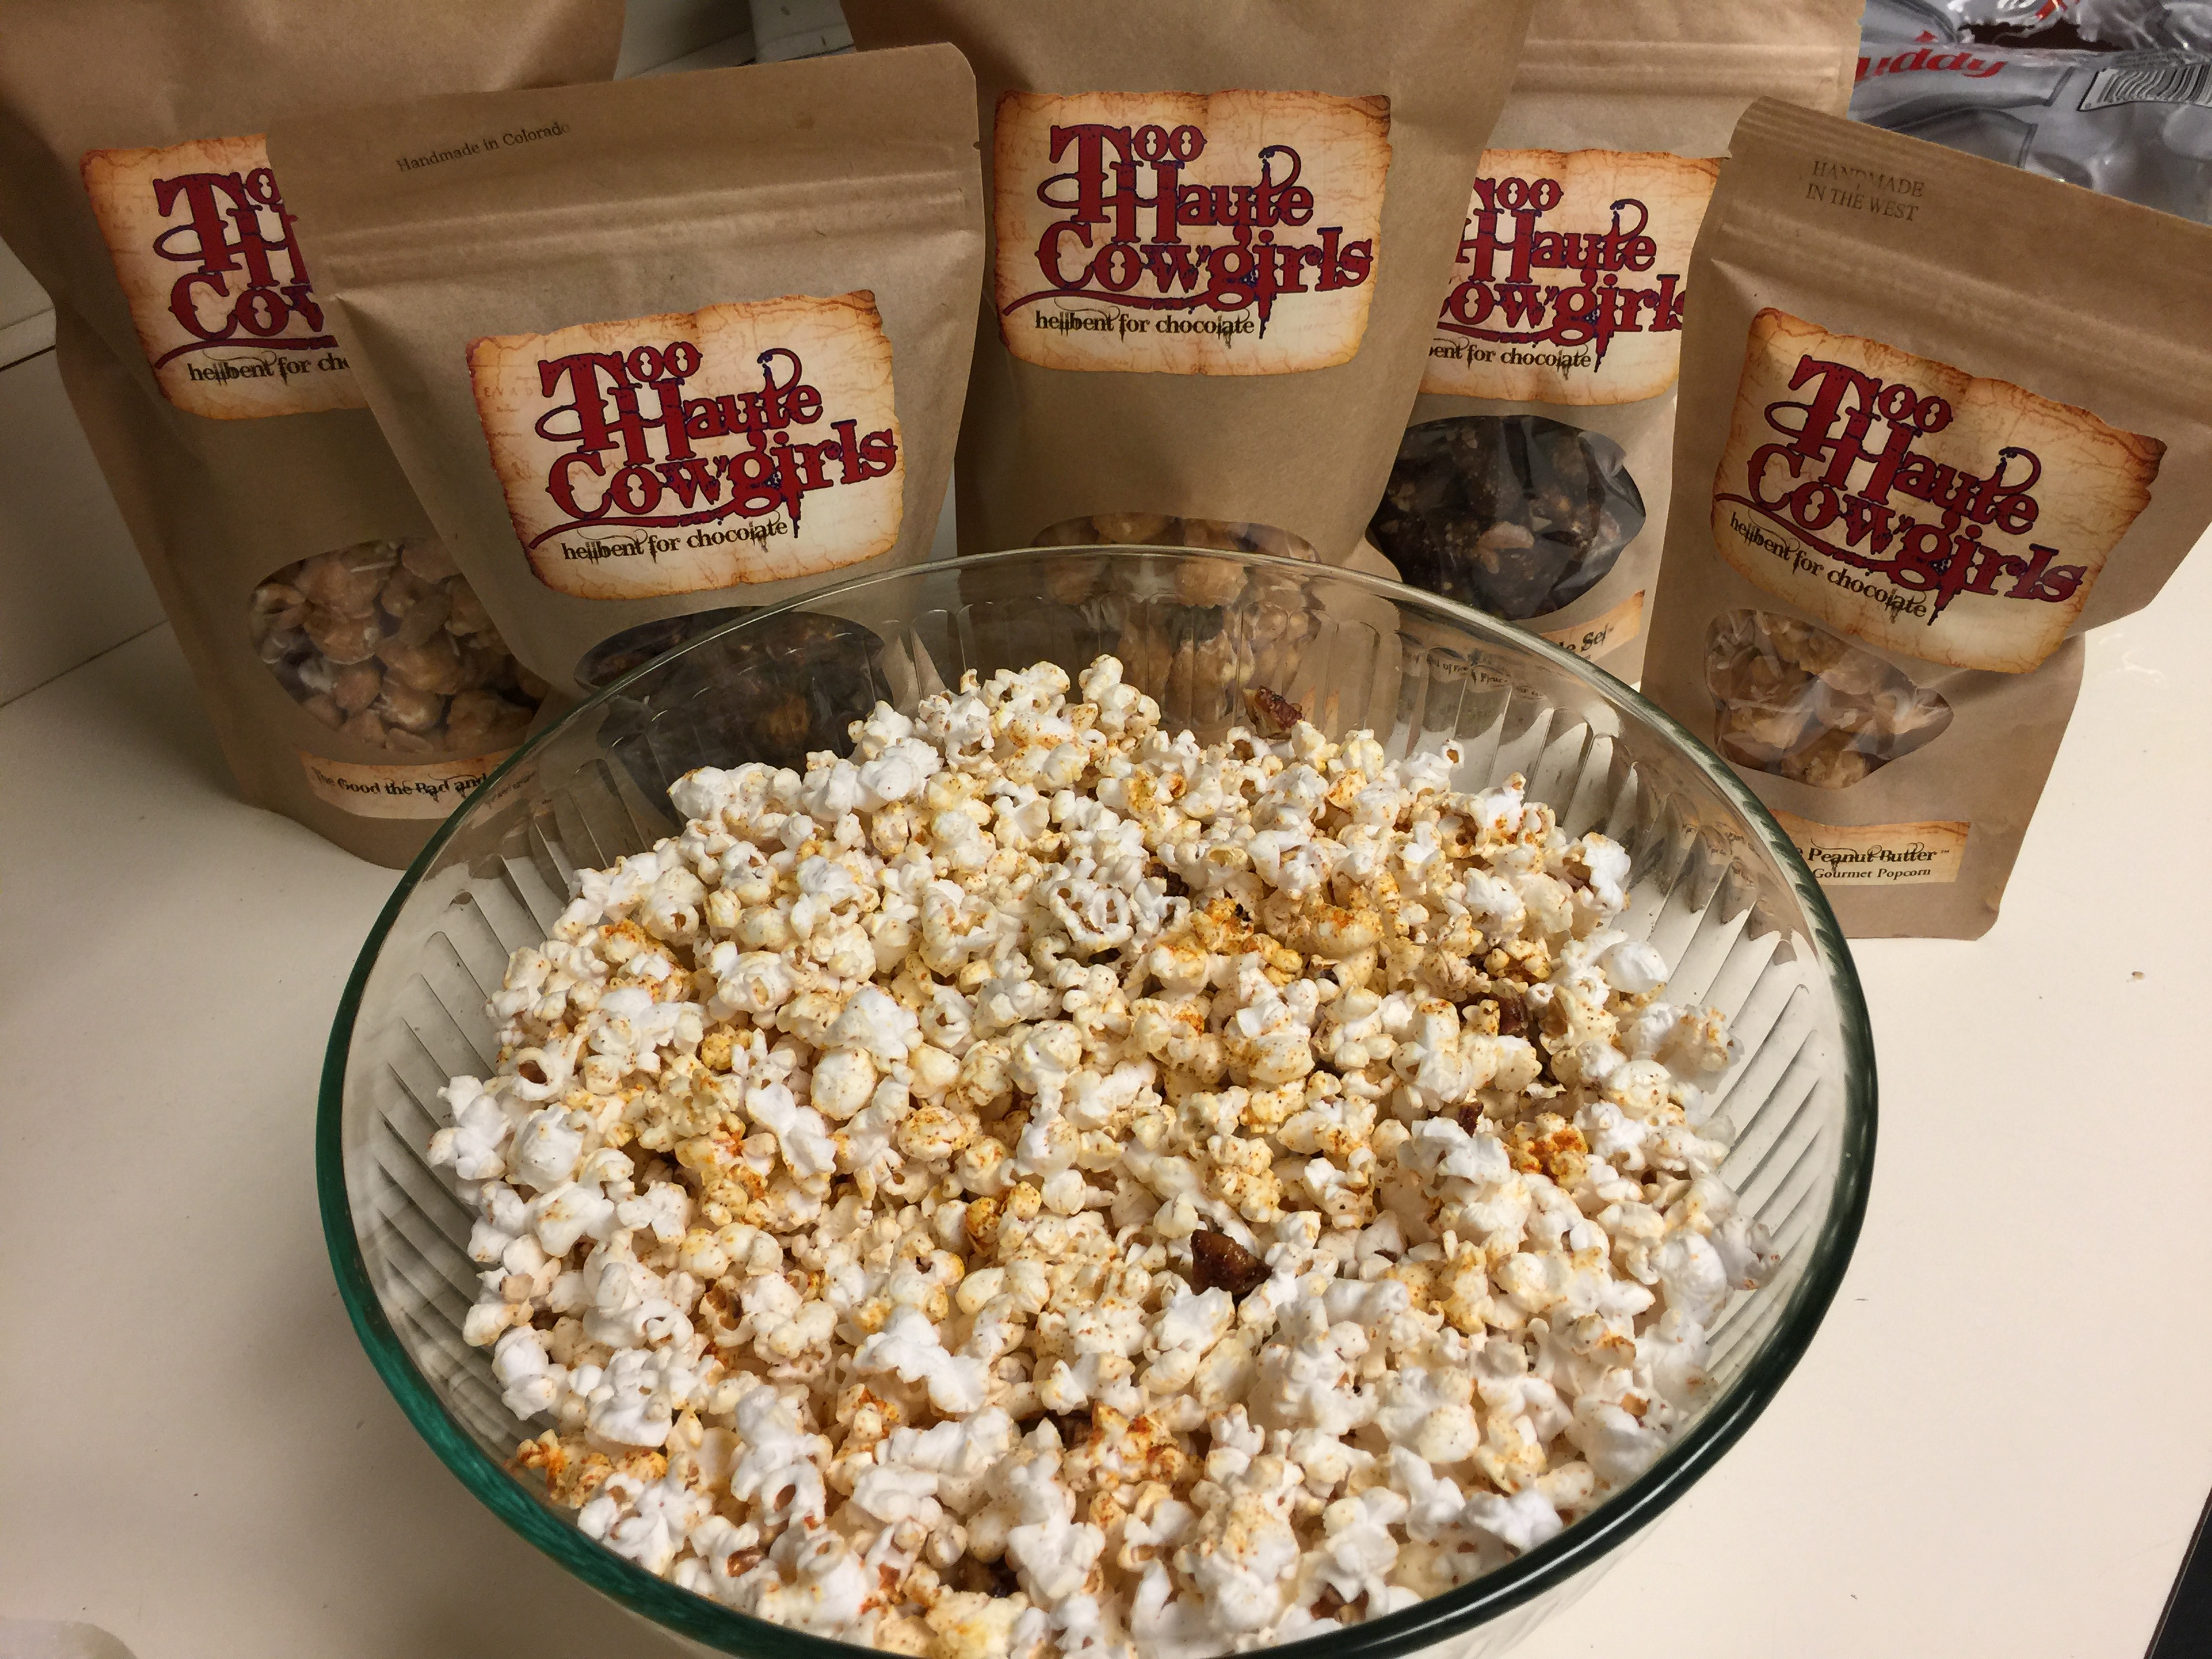 Too Haute Cowgirls Popcorn (credit: Foodie Chap/Liam Mayclem)